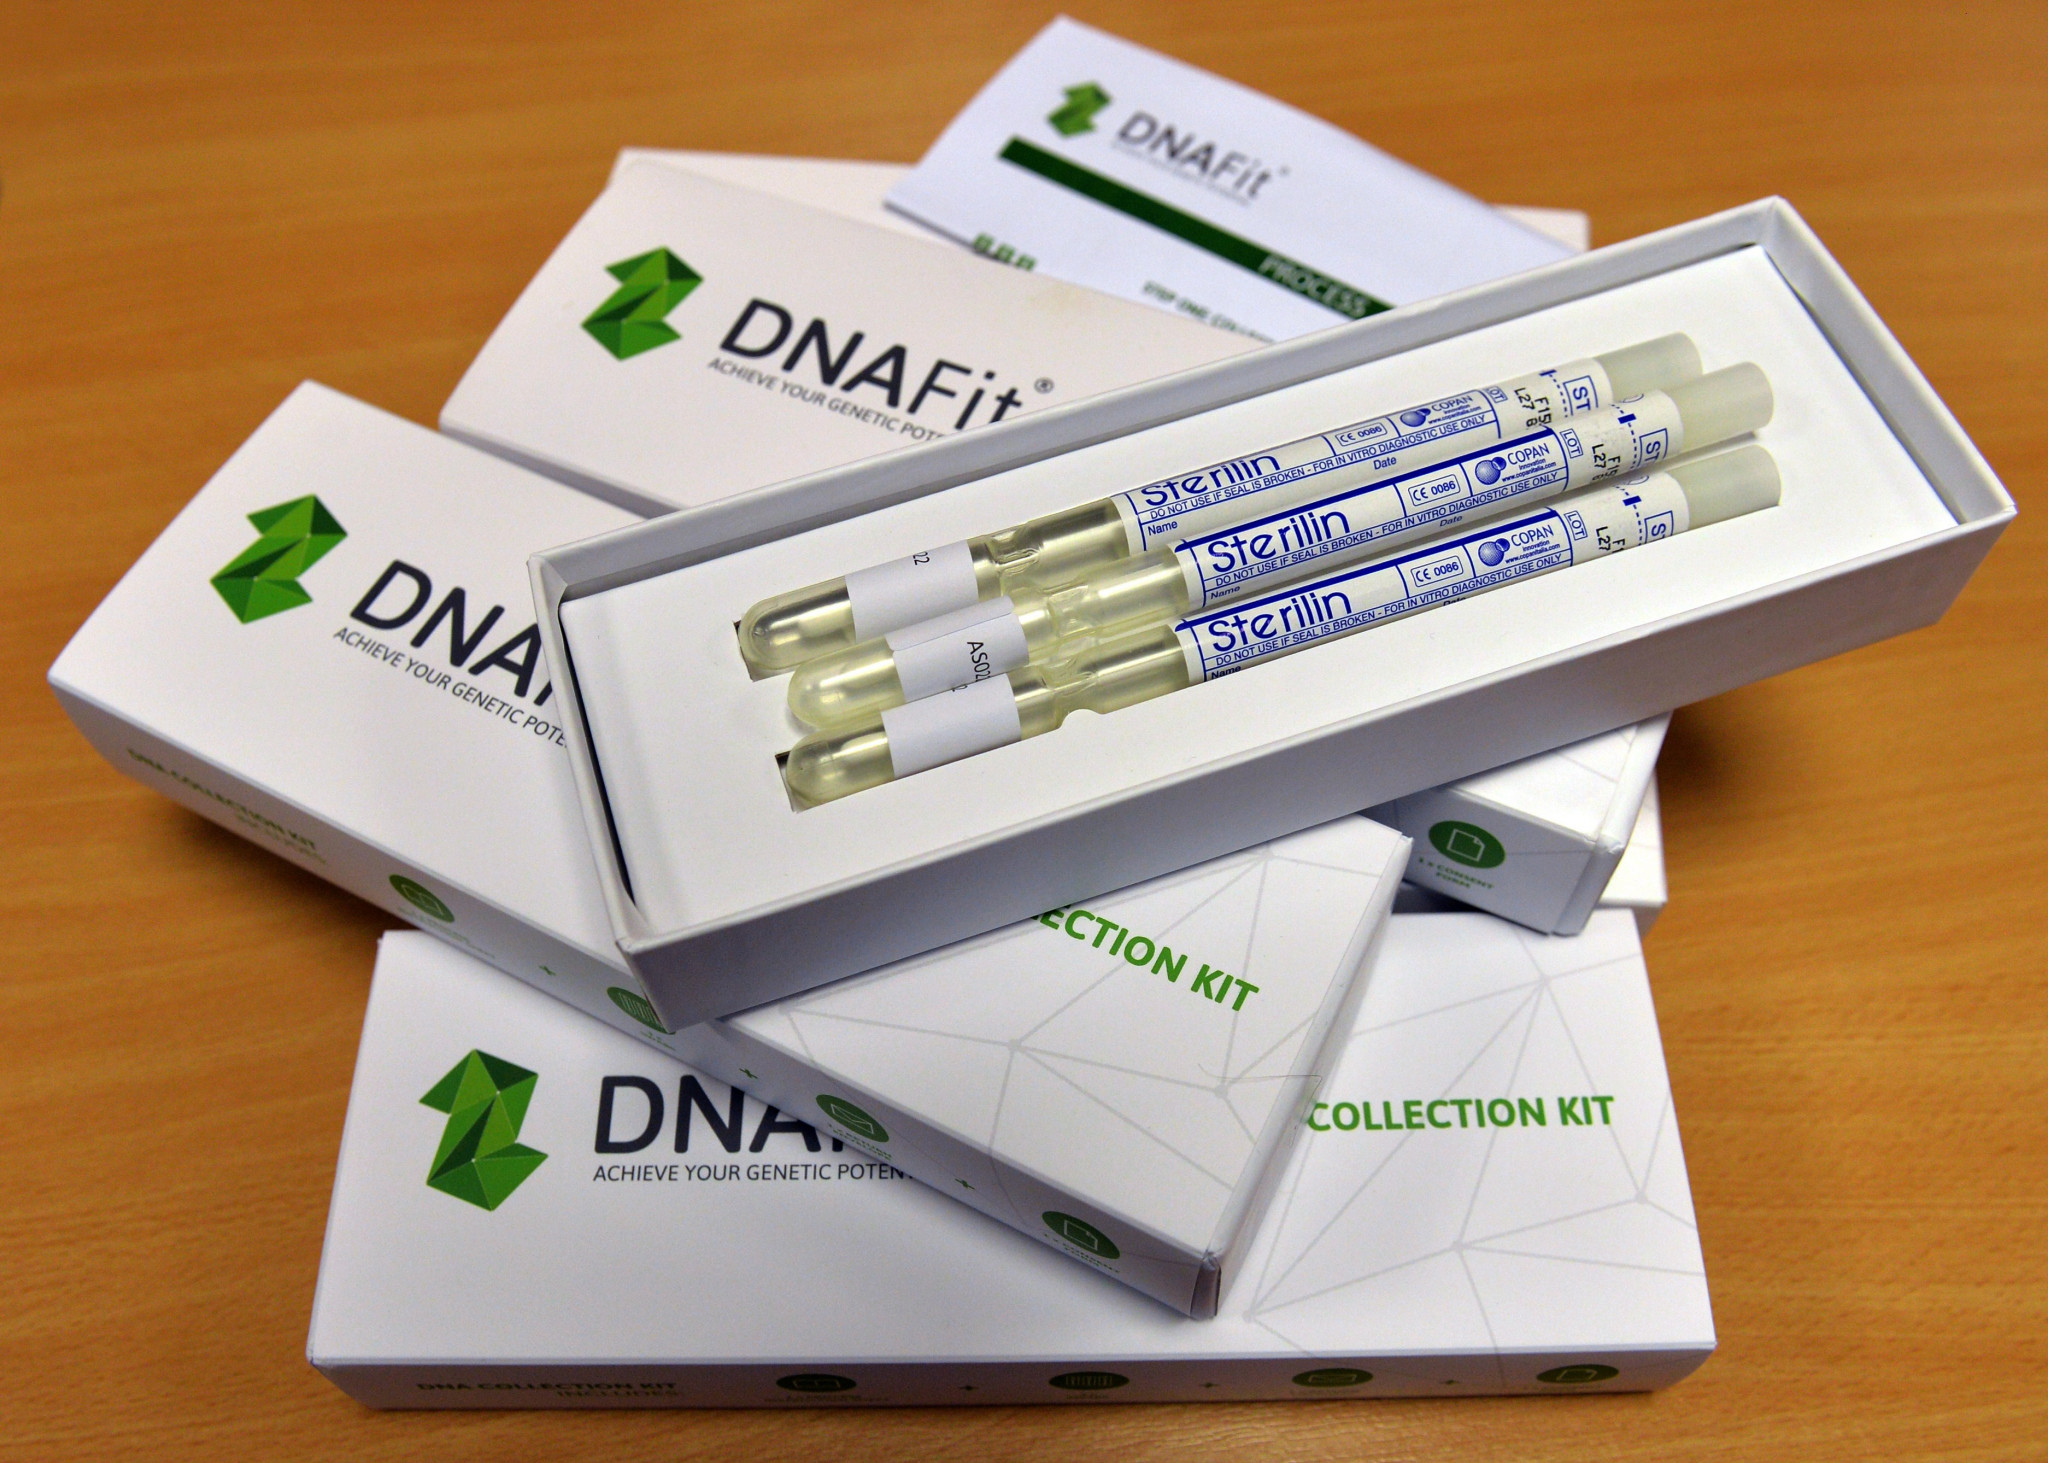 WADA opens application process for gene doping detection research